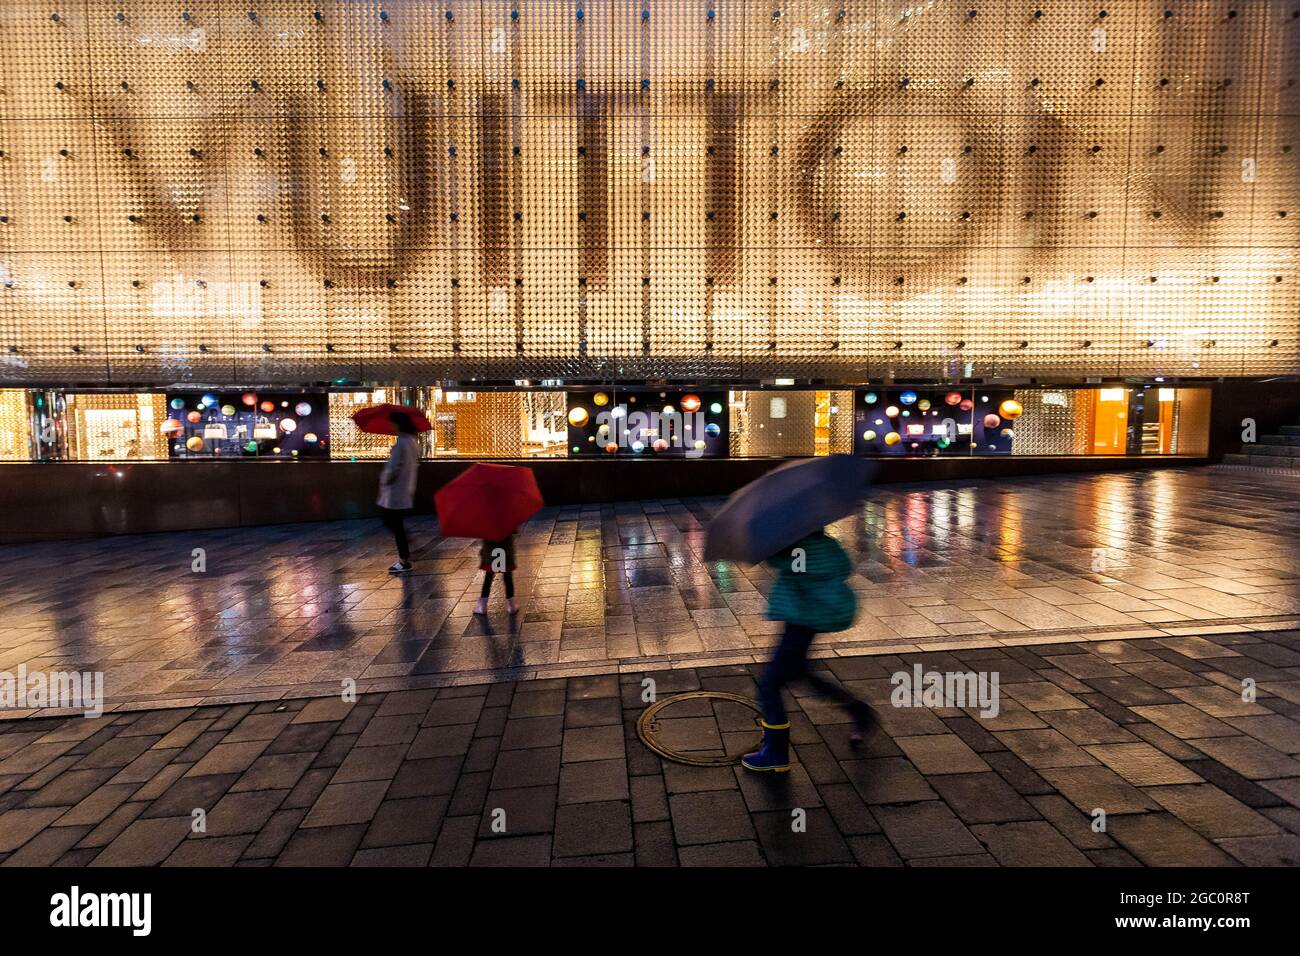 People sheltering from the rain beneath umbrellas walk past a